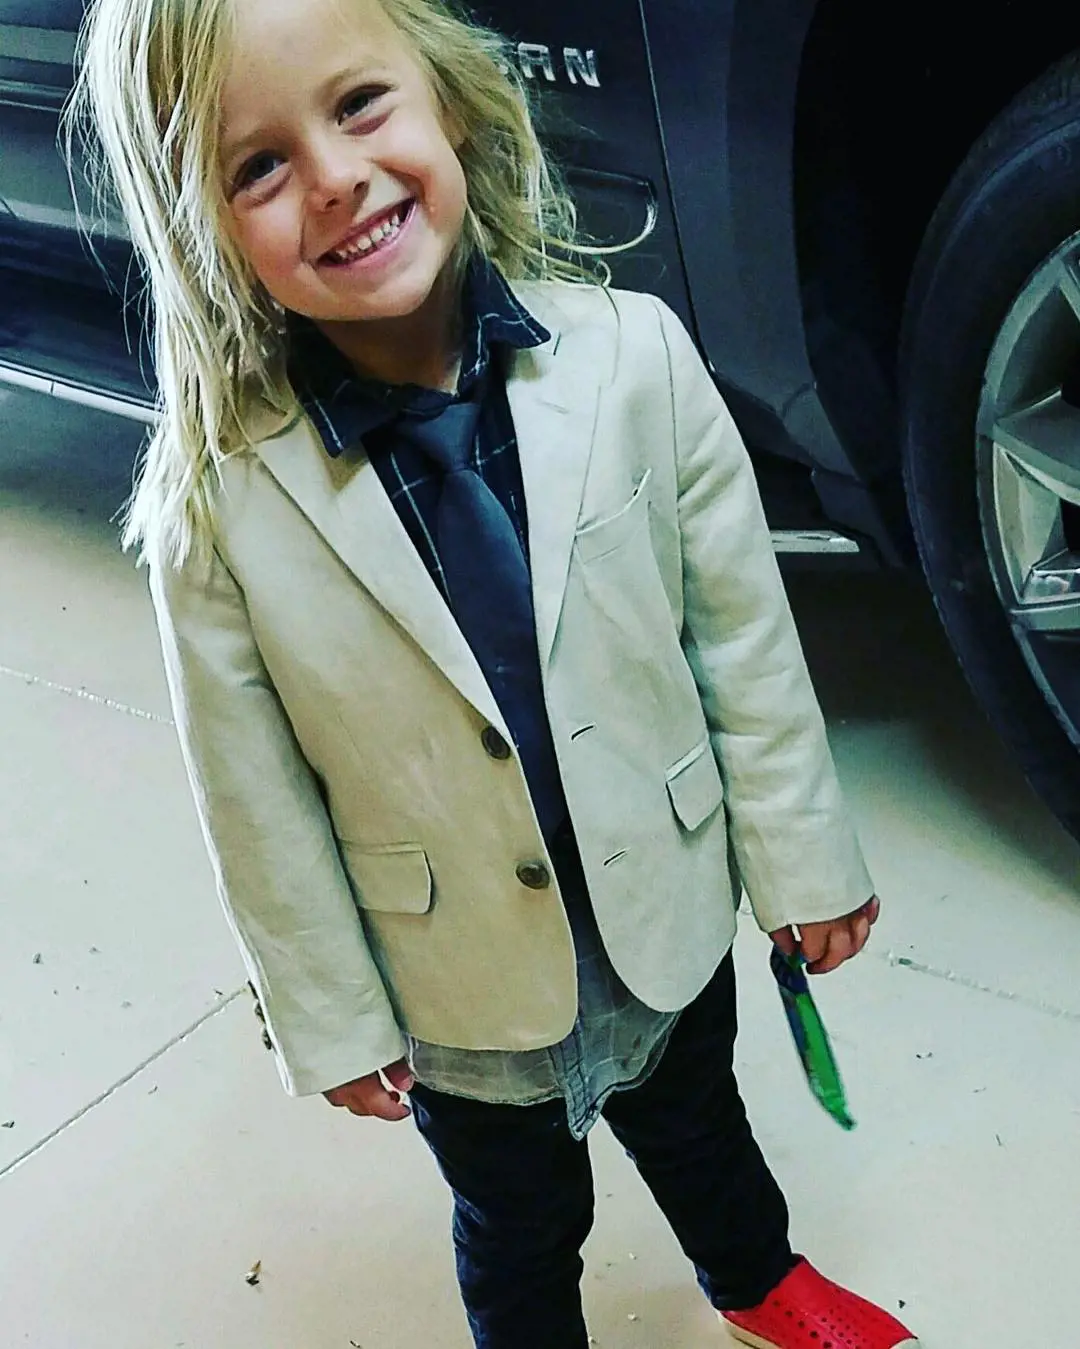 Jeremiah looking cool with his dress up as he head up on his way to church. 